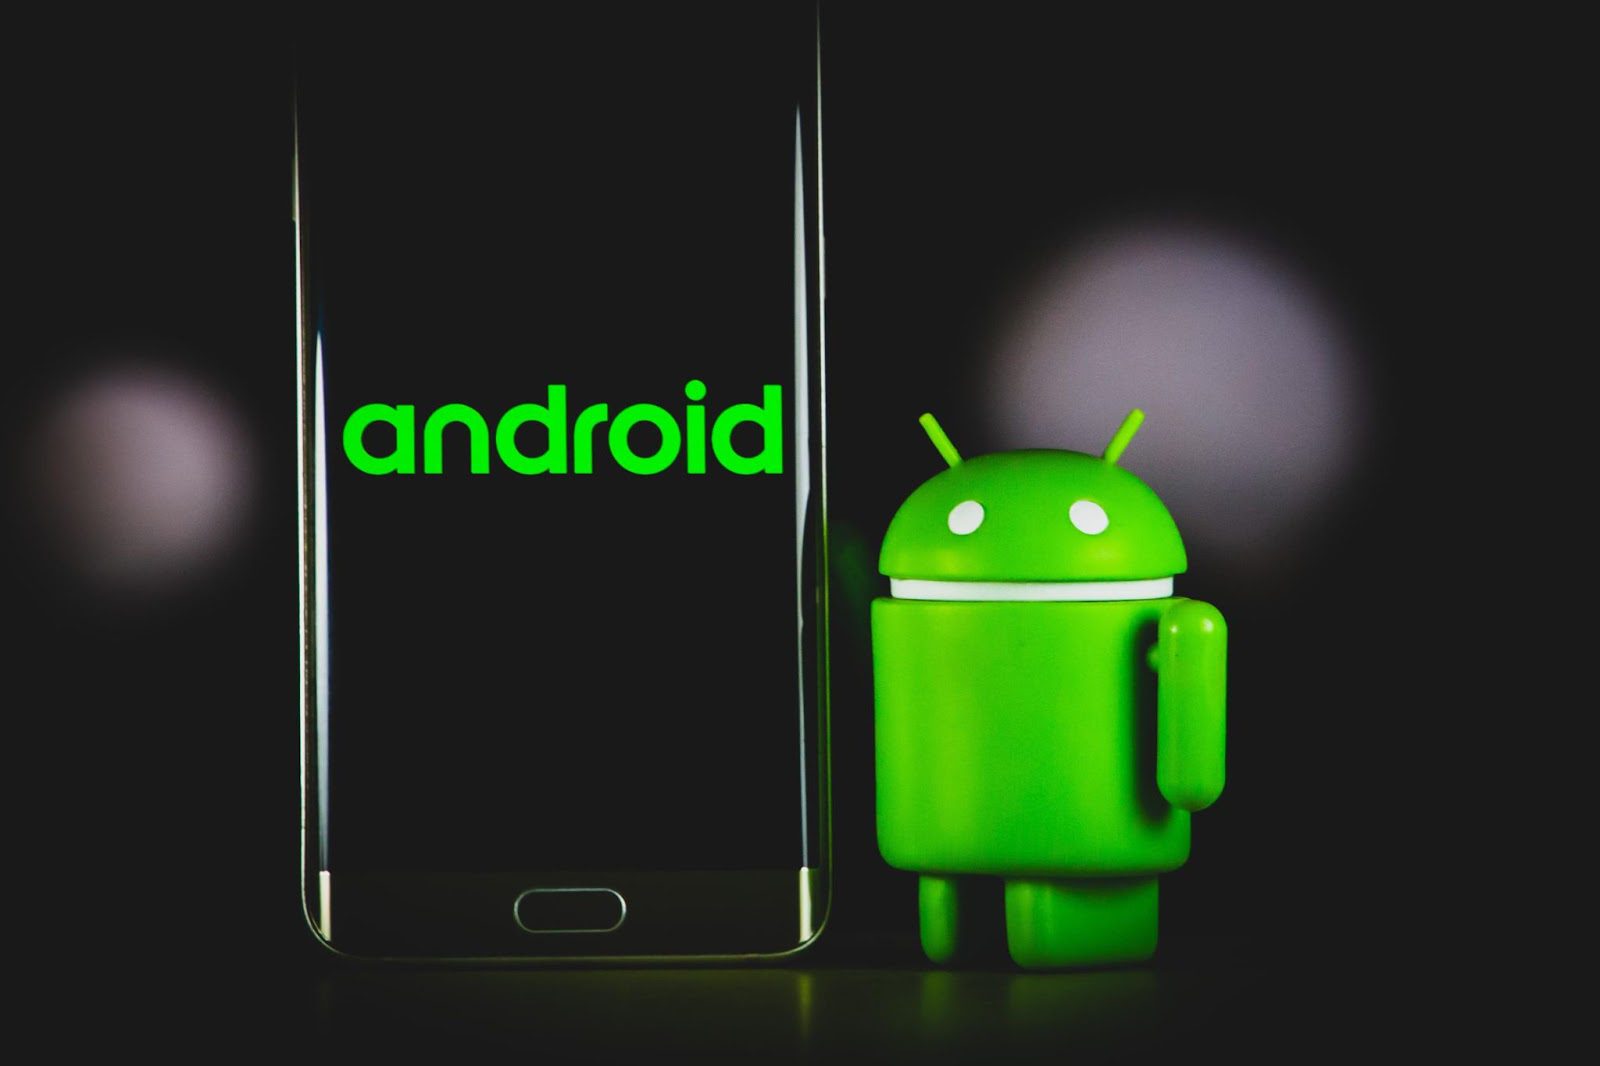 An android phone with the wired “Android” on the screen and a bot beside it.